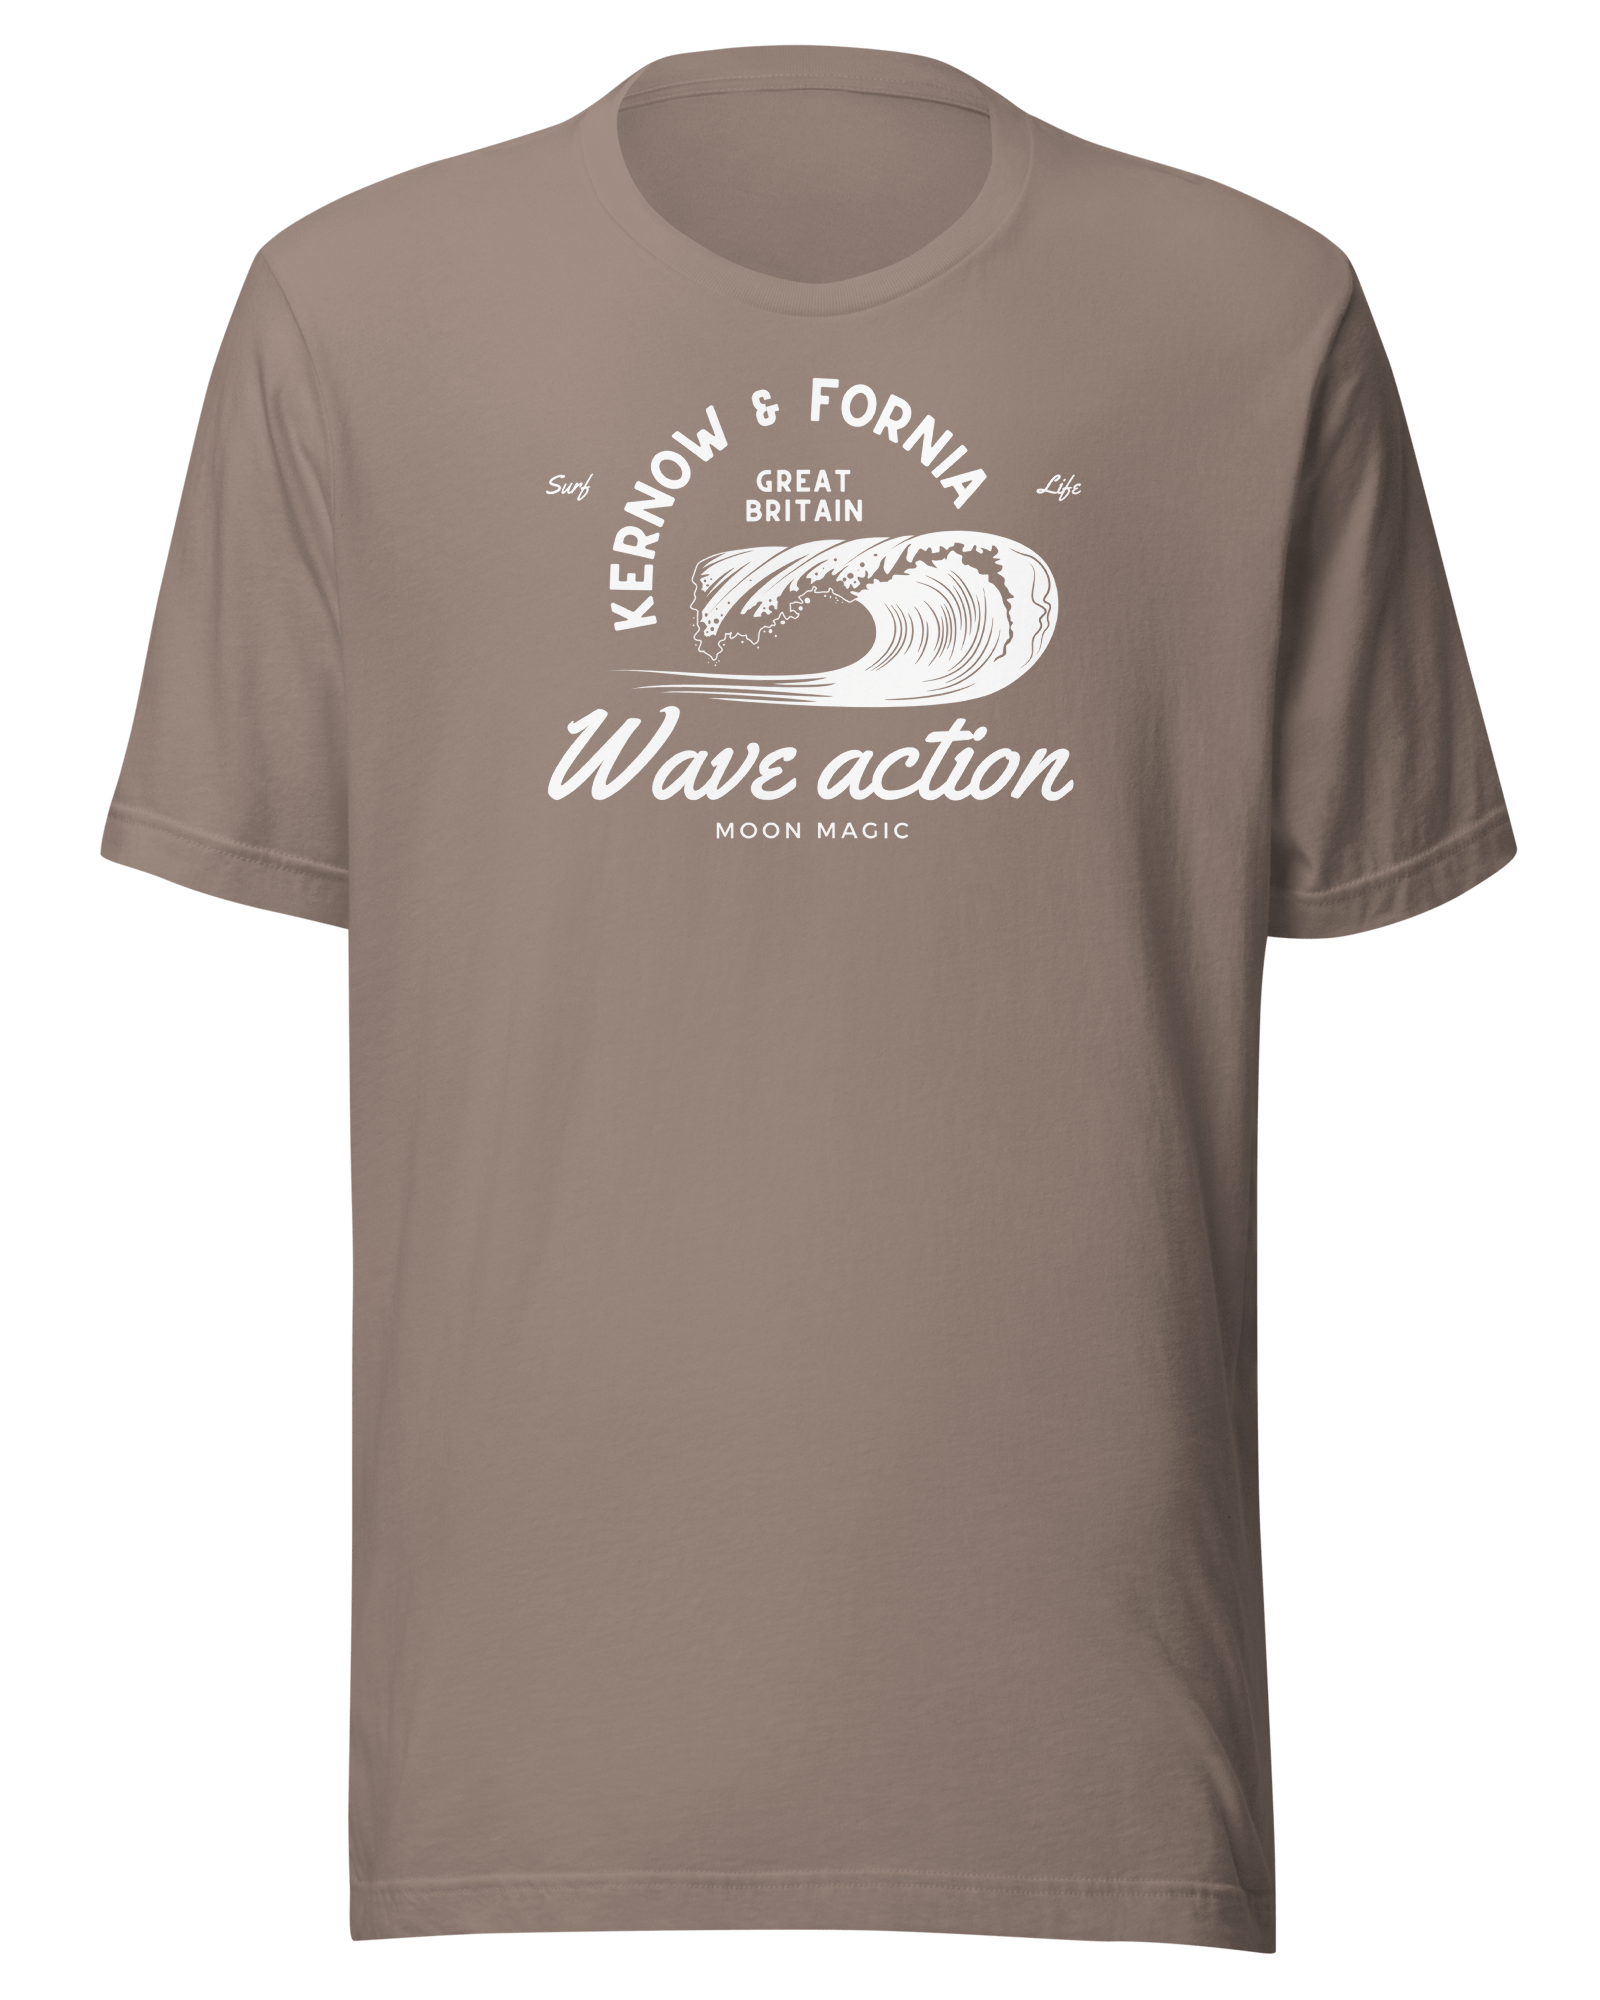 Kernow & Fornia Great Britain Wave Action T-shirt Pebble / S Shirts & Tops Jolly & Goode